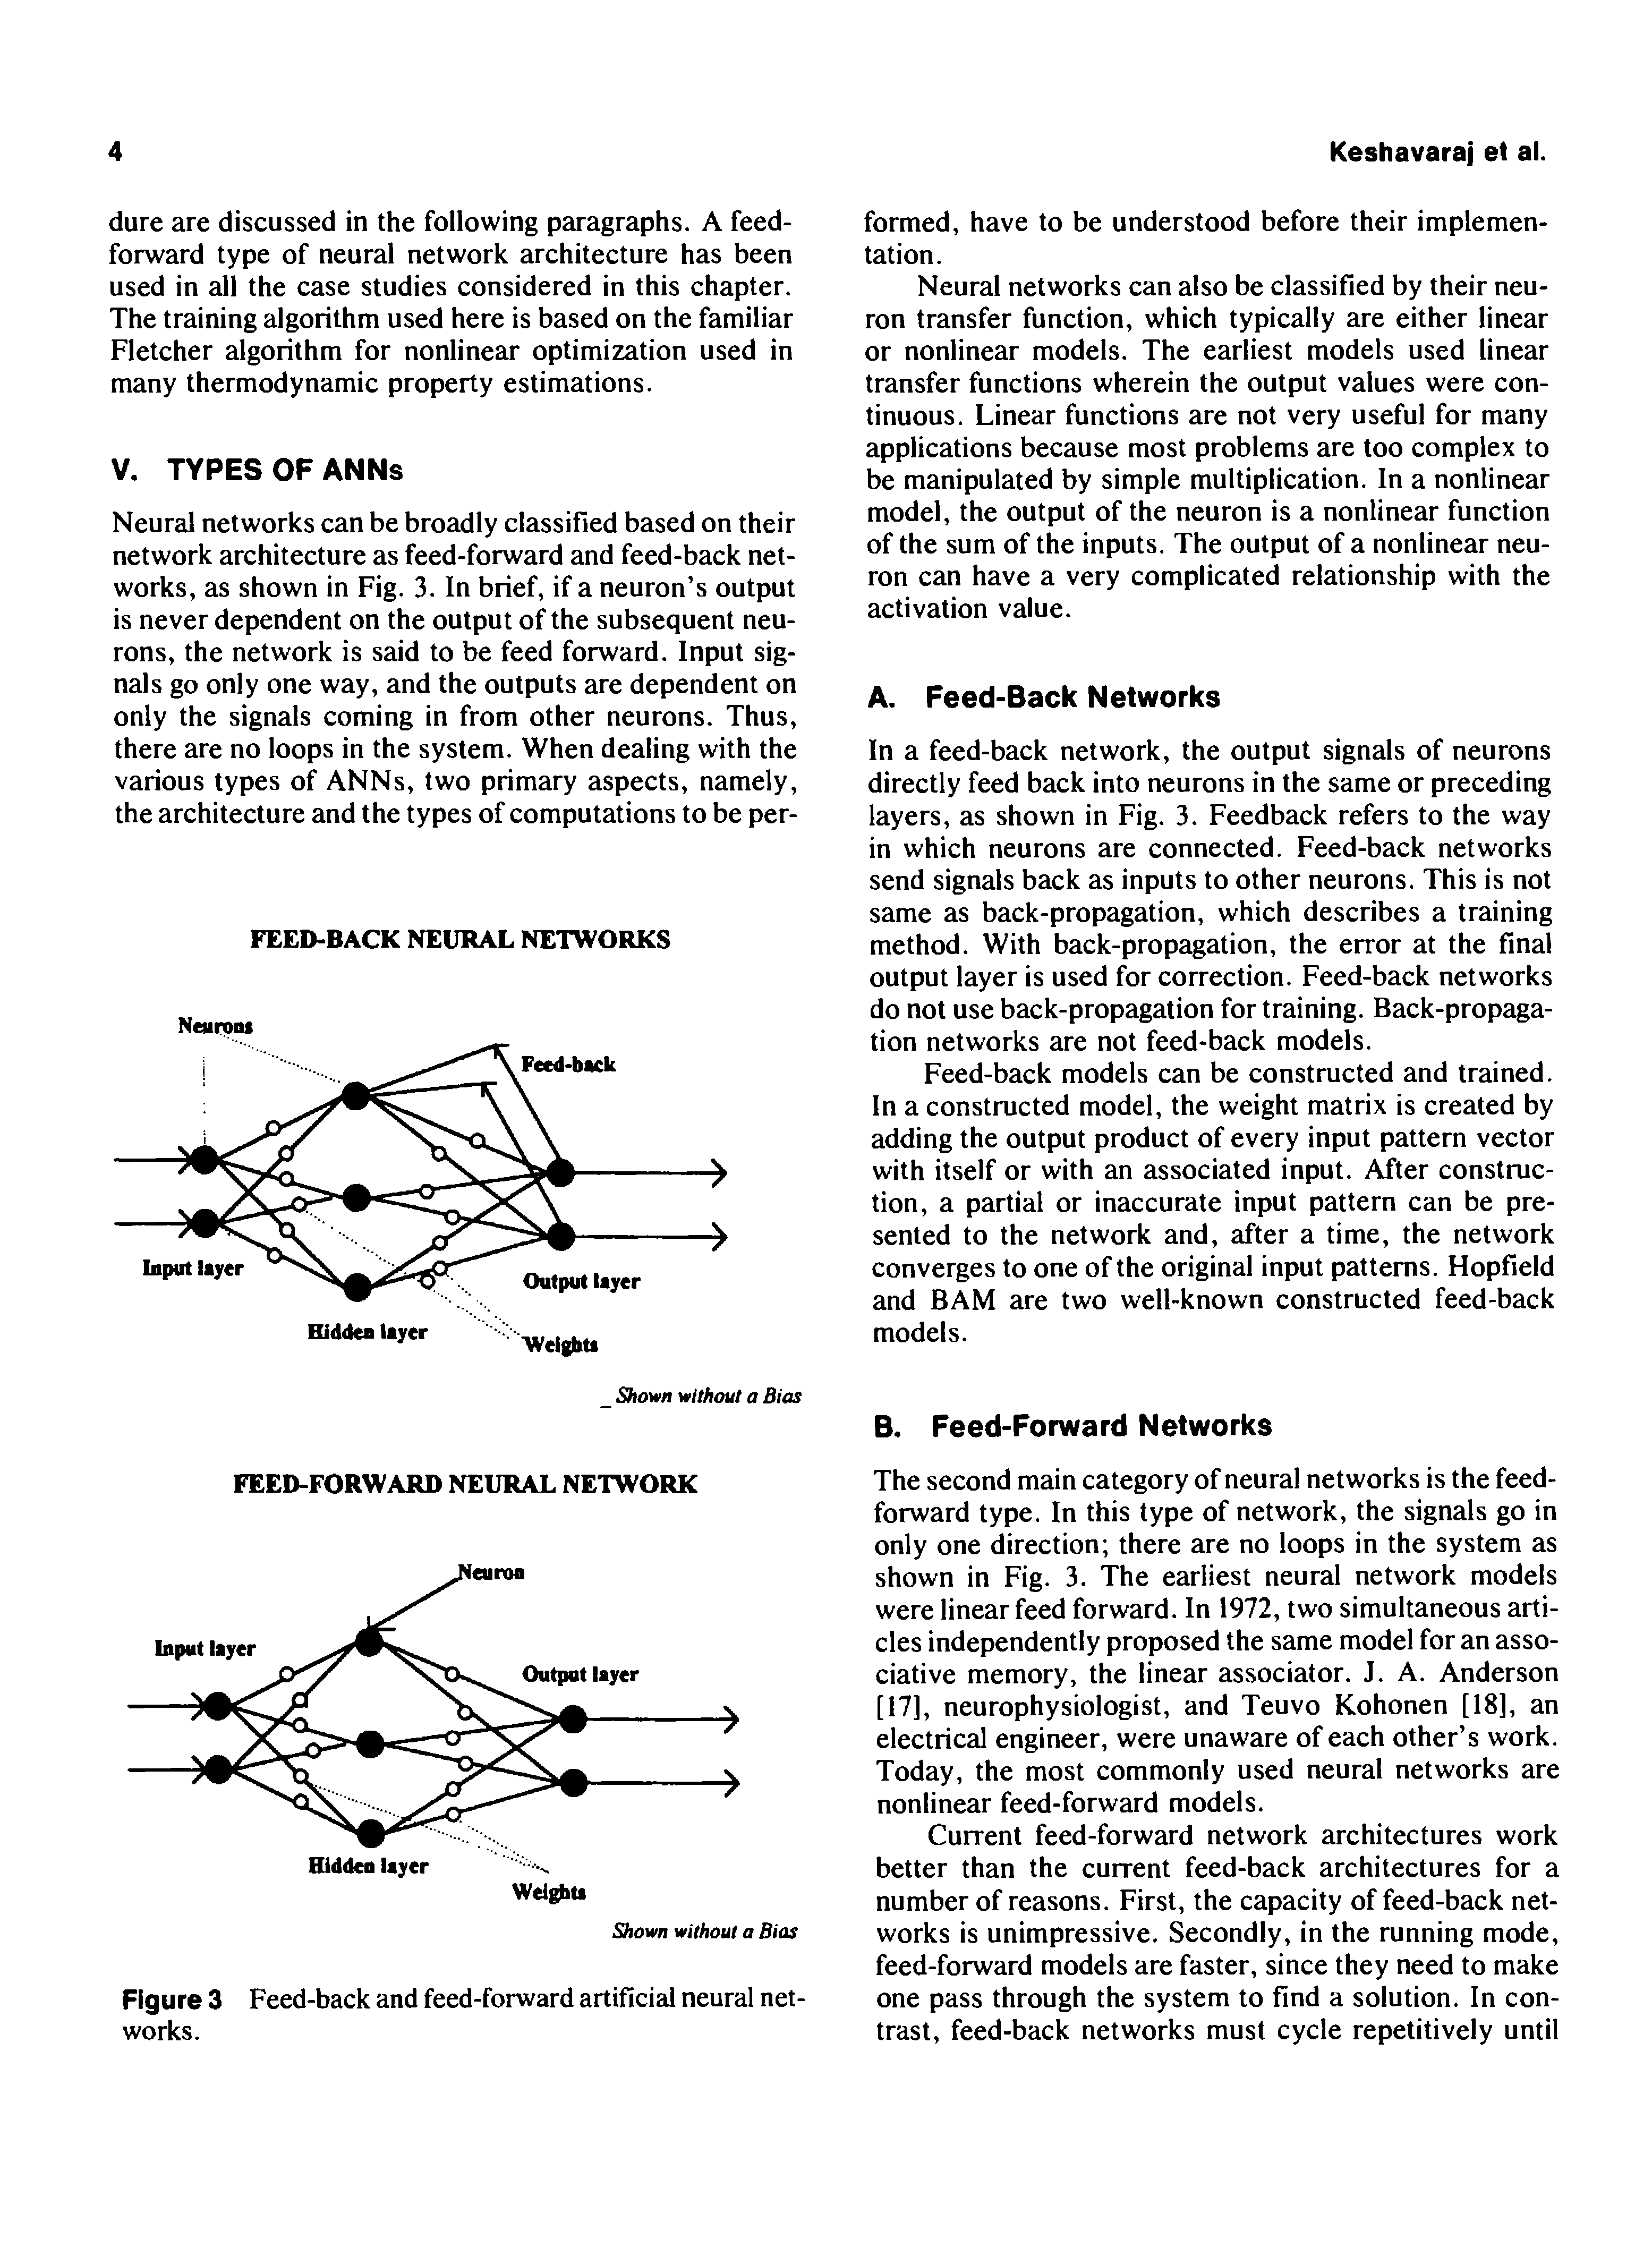 Figure 3 Feed-back and feed-forward artificial neural networks.